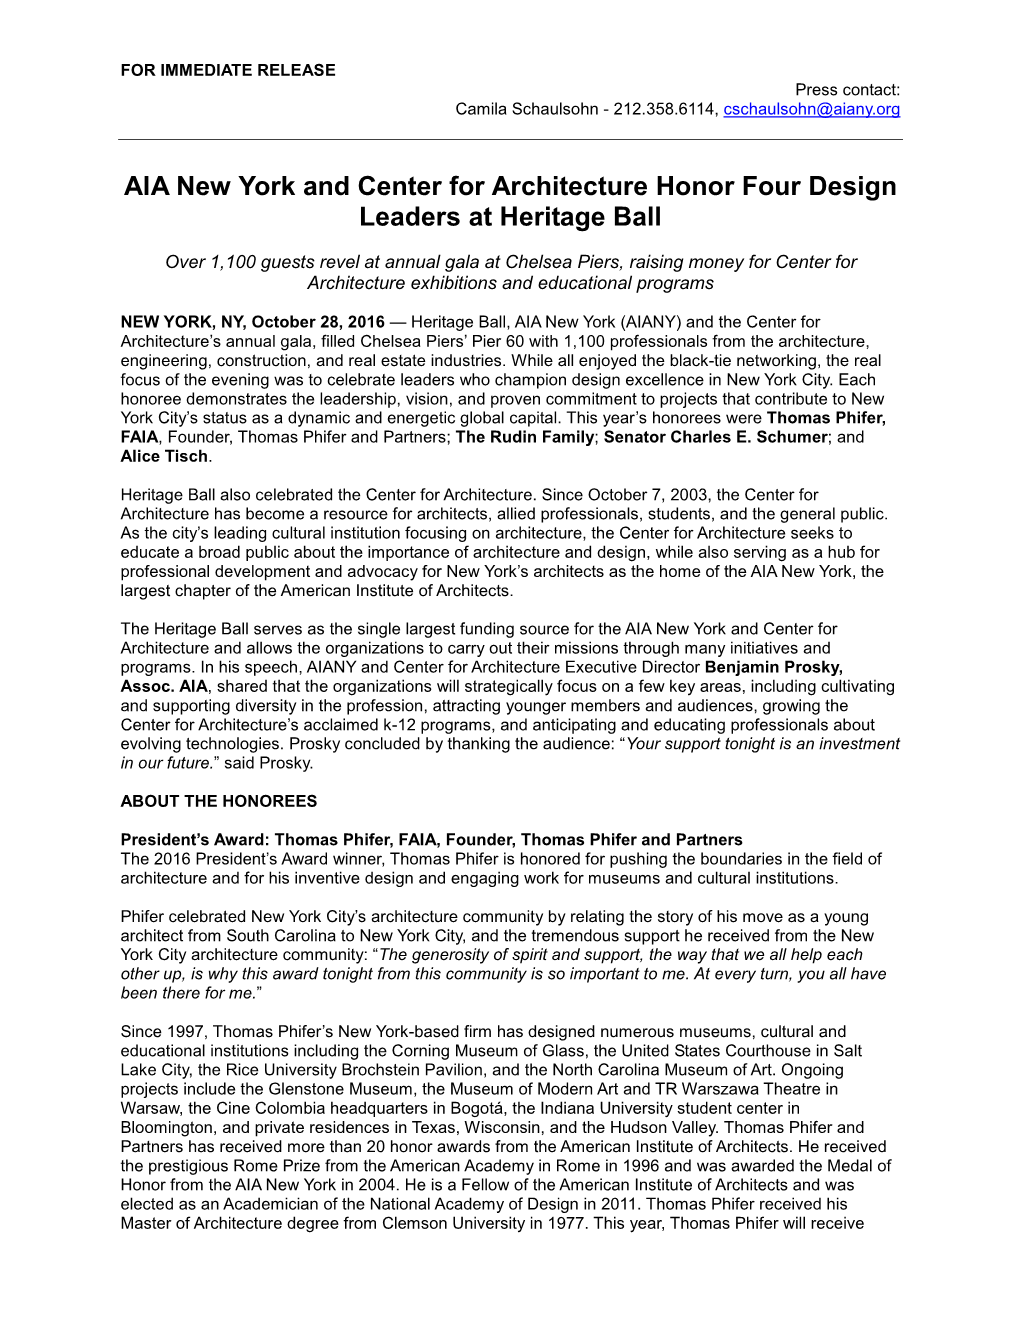 AIA New York and Center for Architecture Honor Four Design Leaders at Heritage Ball